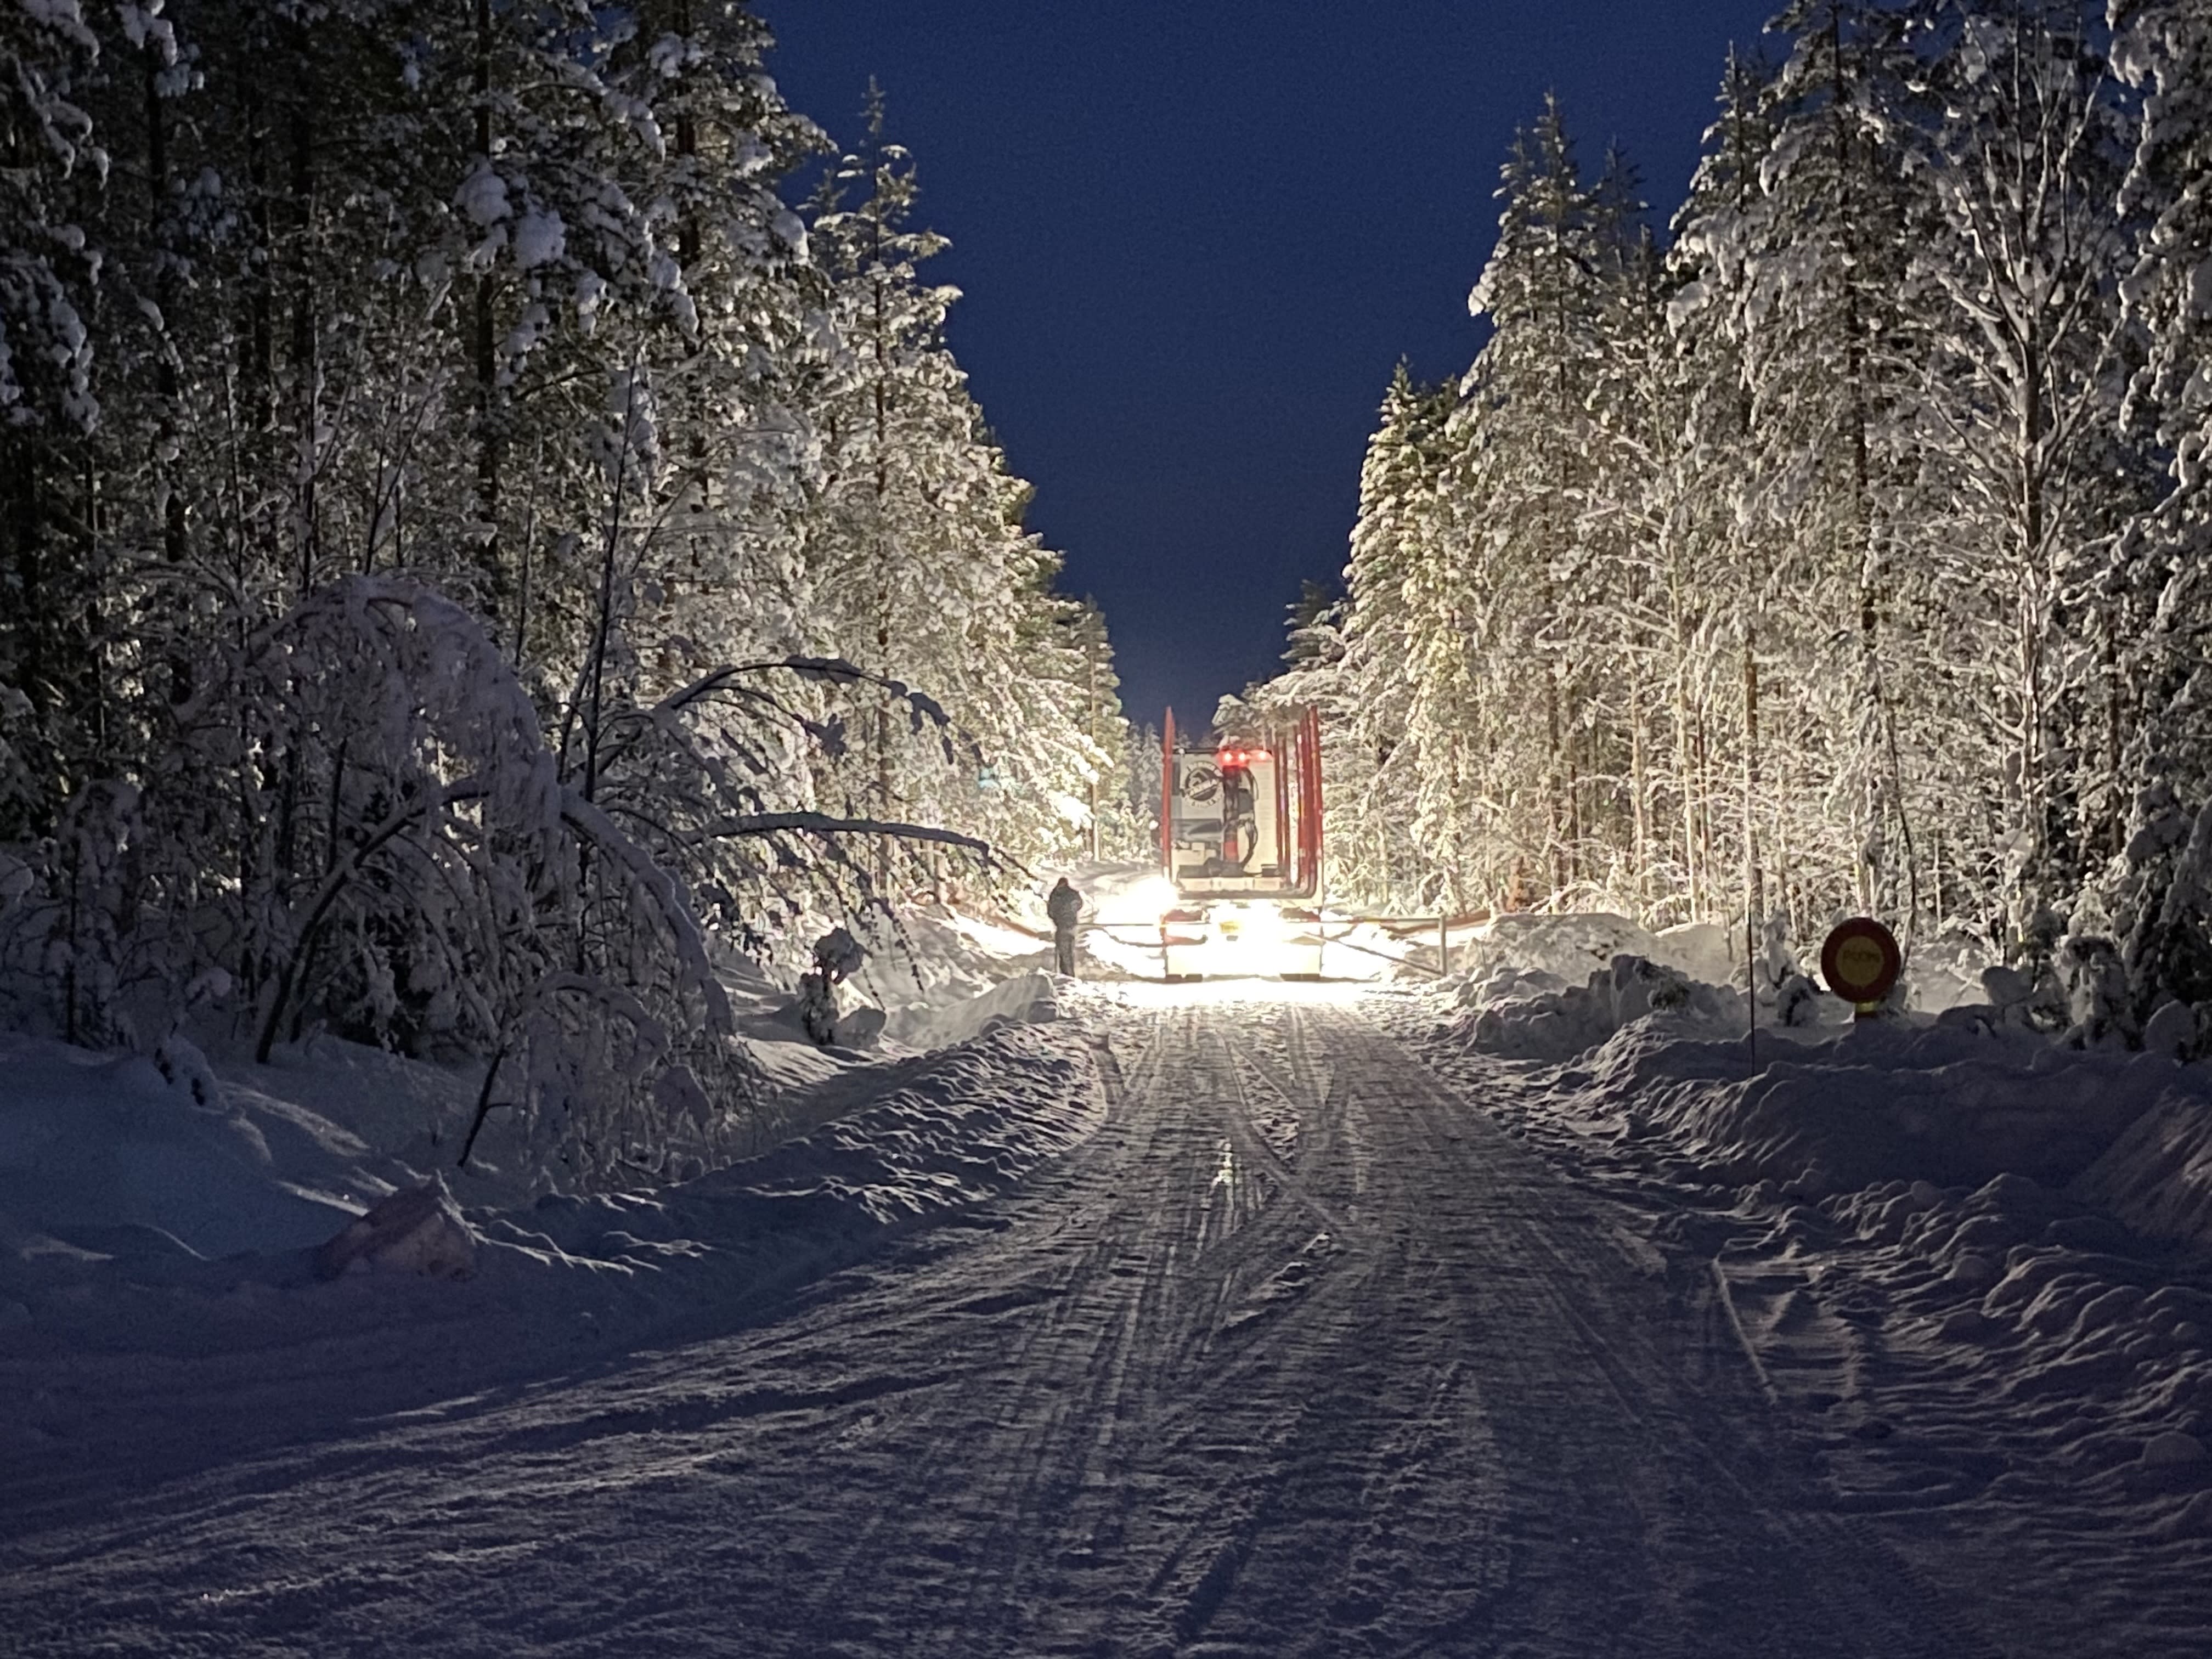 Activists block the road to a logging area in Lapland